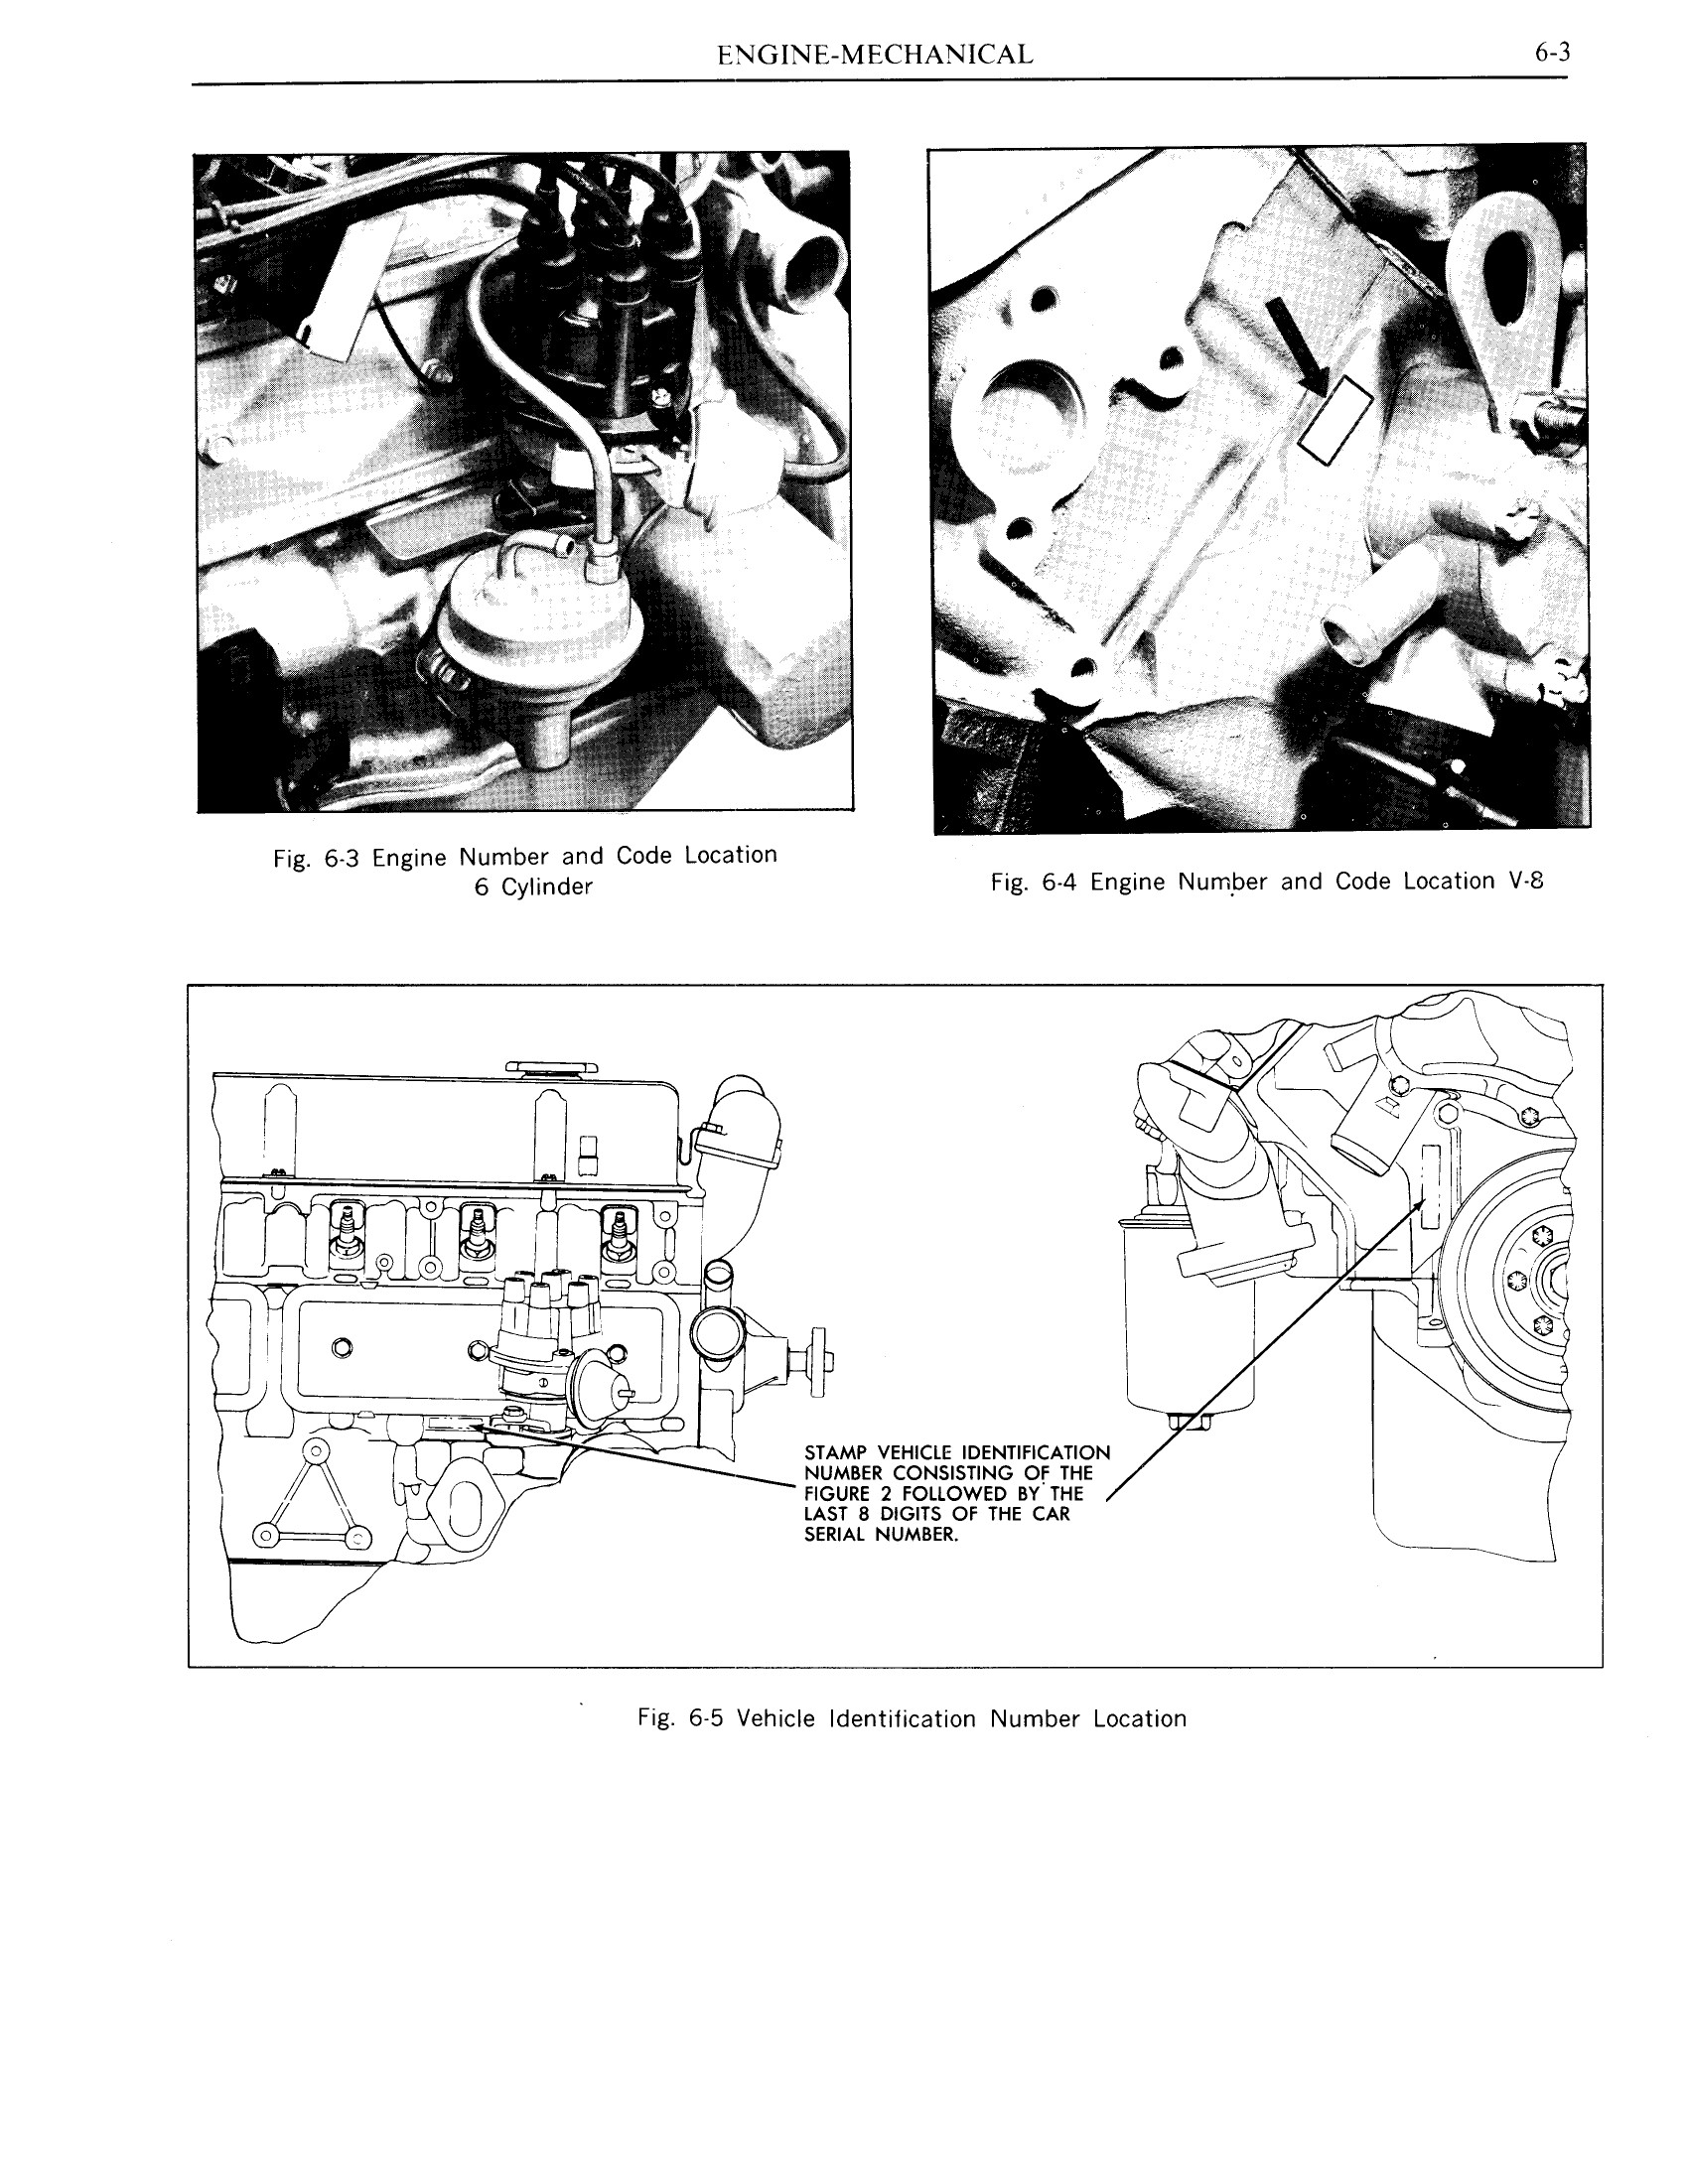 1970 Pontiac Chassis Service Manual - Engine Mechanical Page 3 of 100